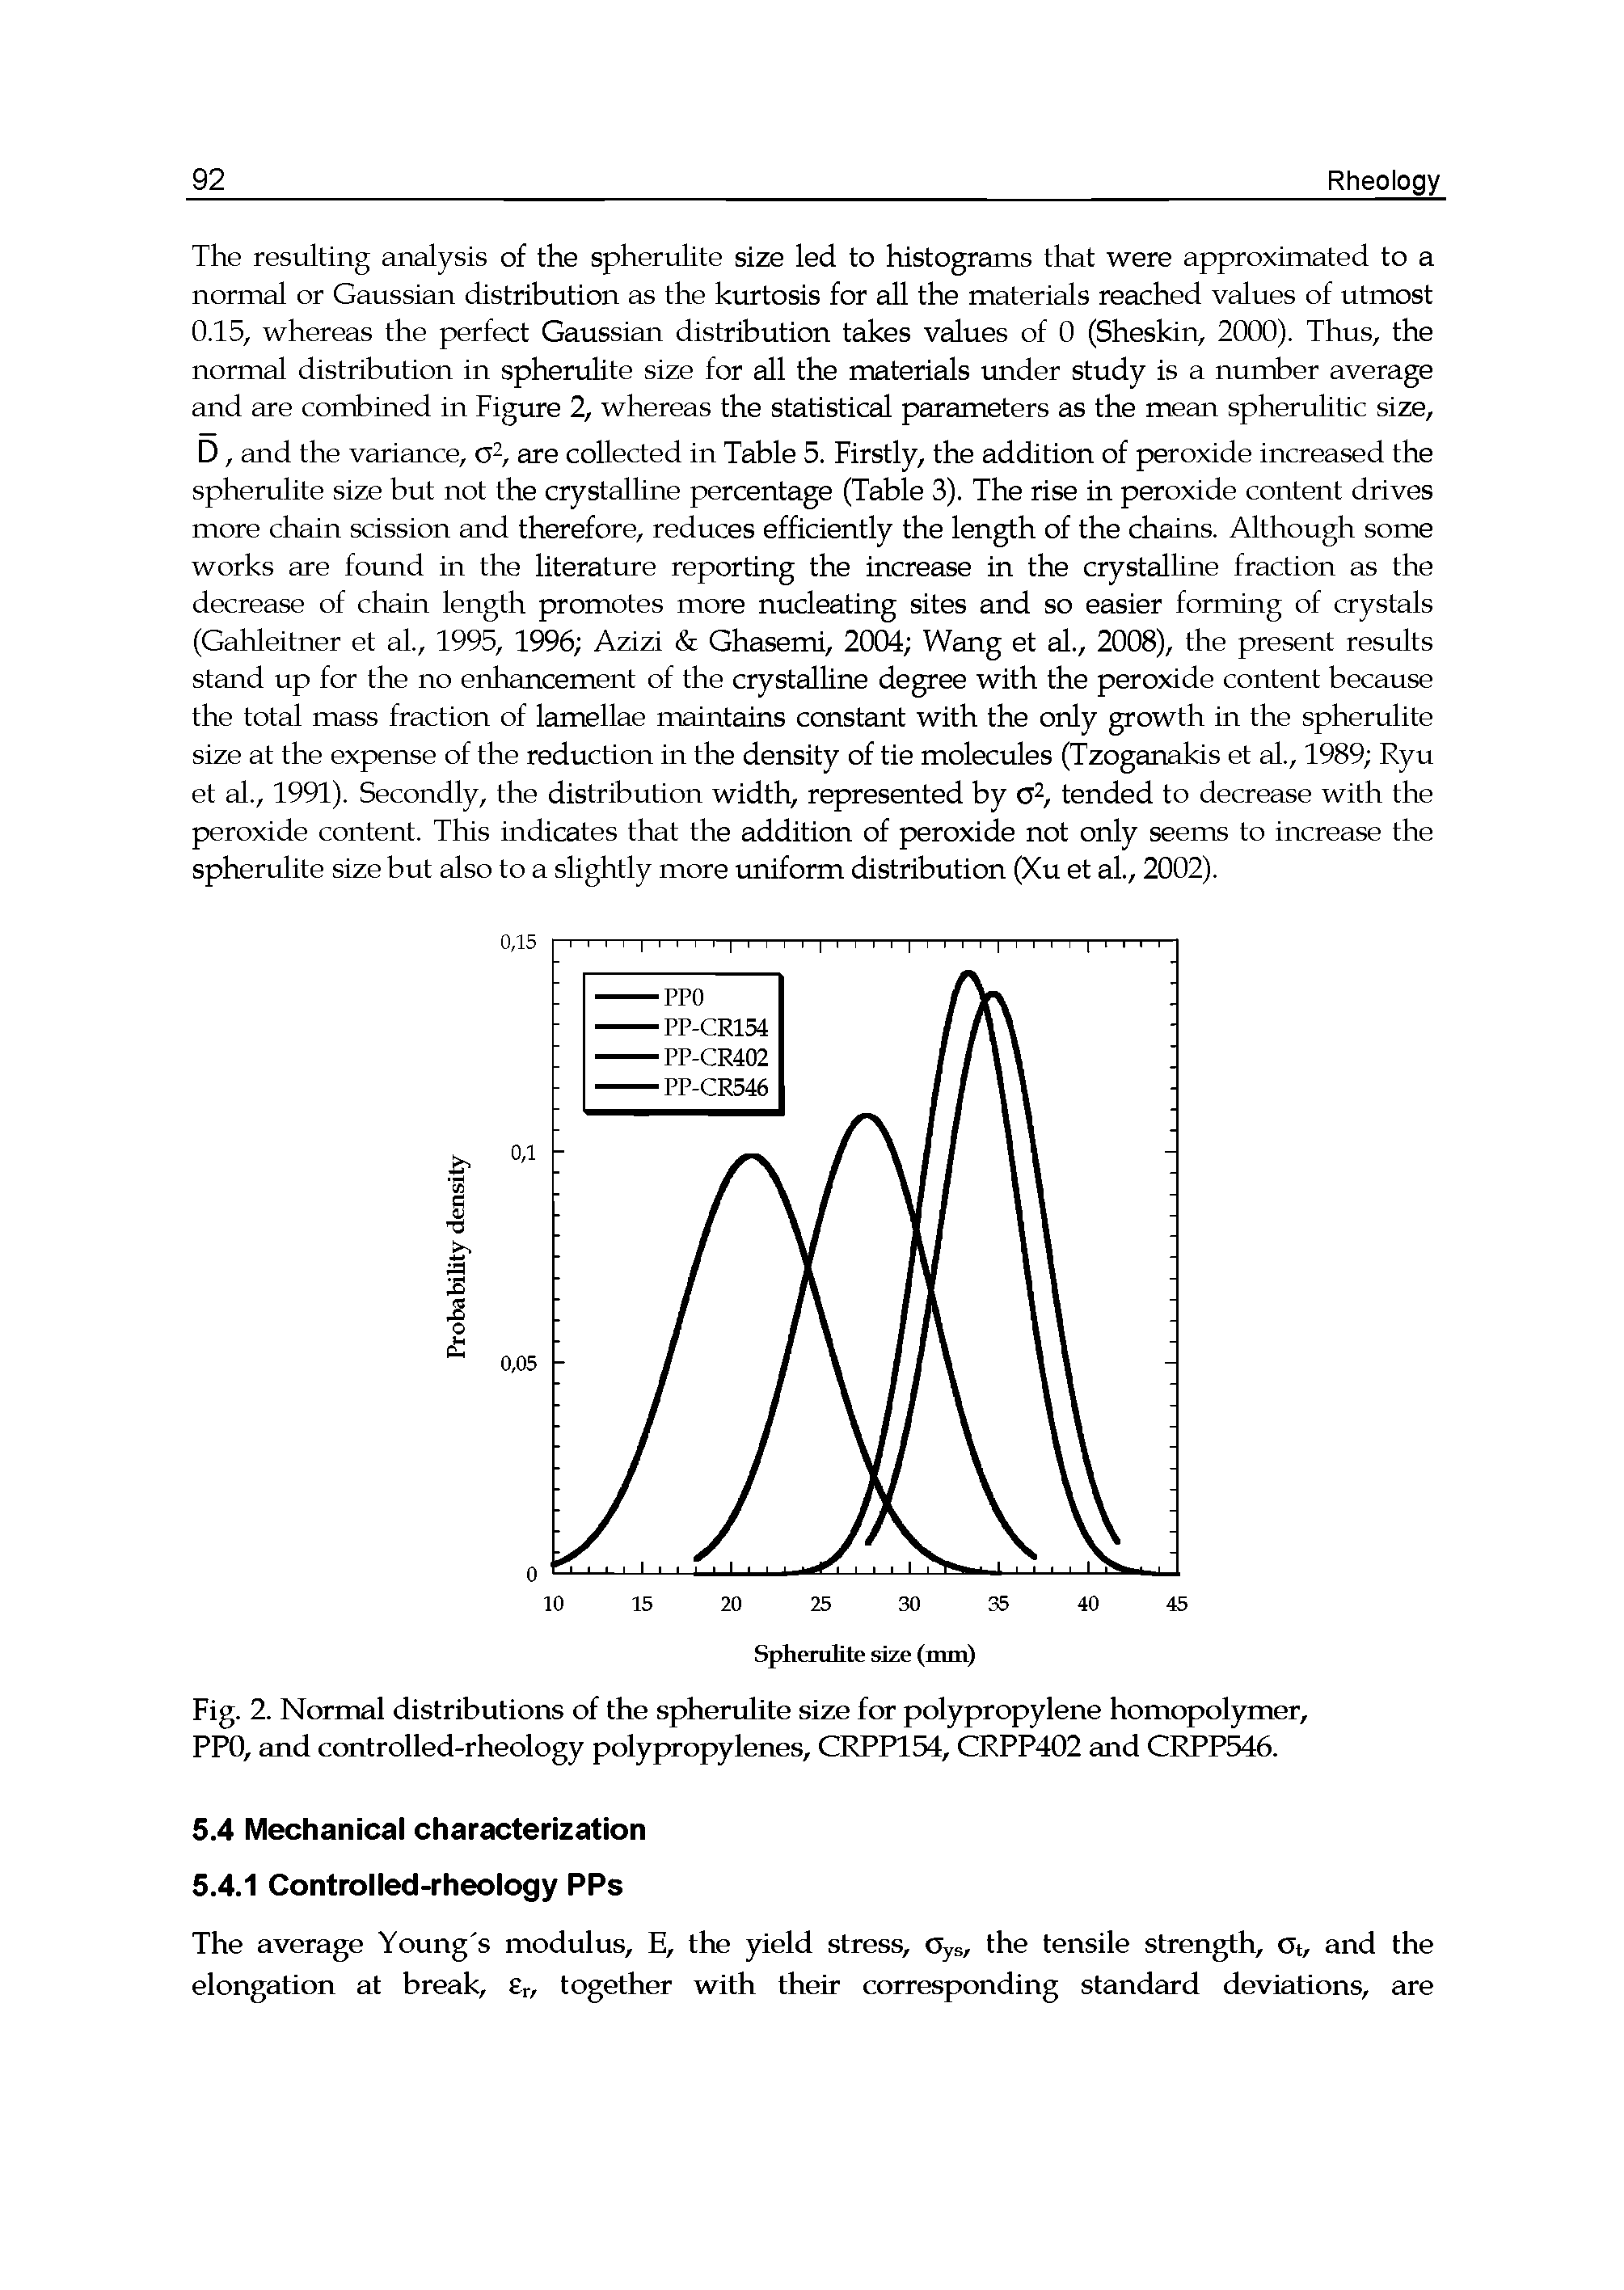 Fig. 2. Normal distributions of the spherulite size for polypropylene homopolymer, PPO, and controlled-rheology polypropylenes, CRPP154, CRPP402 and CRPP546.